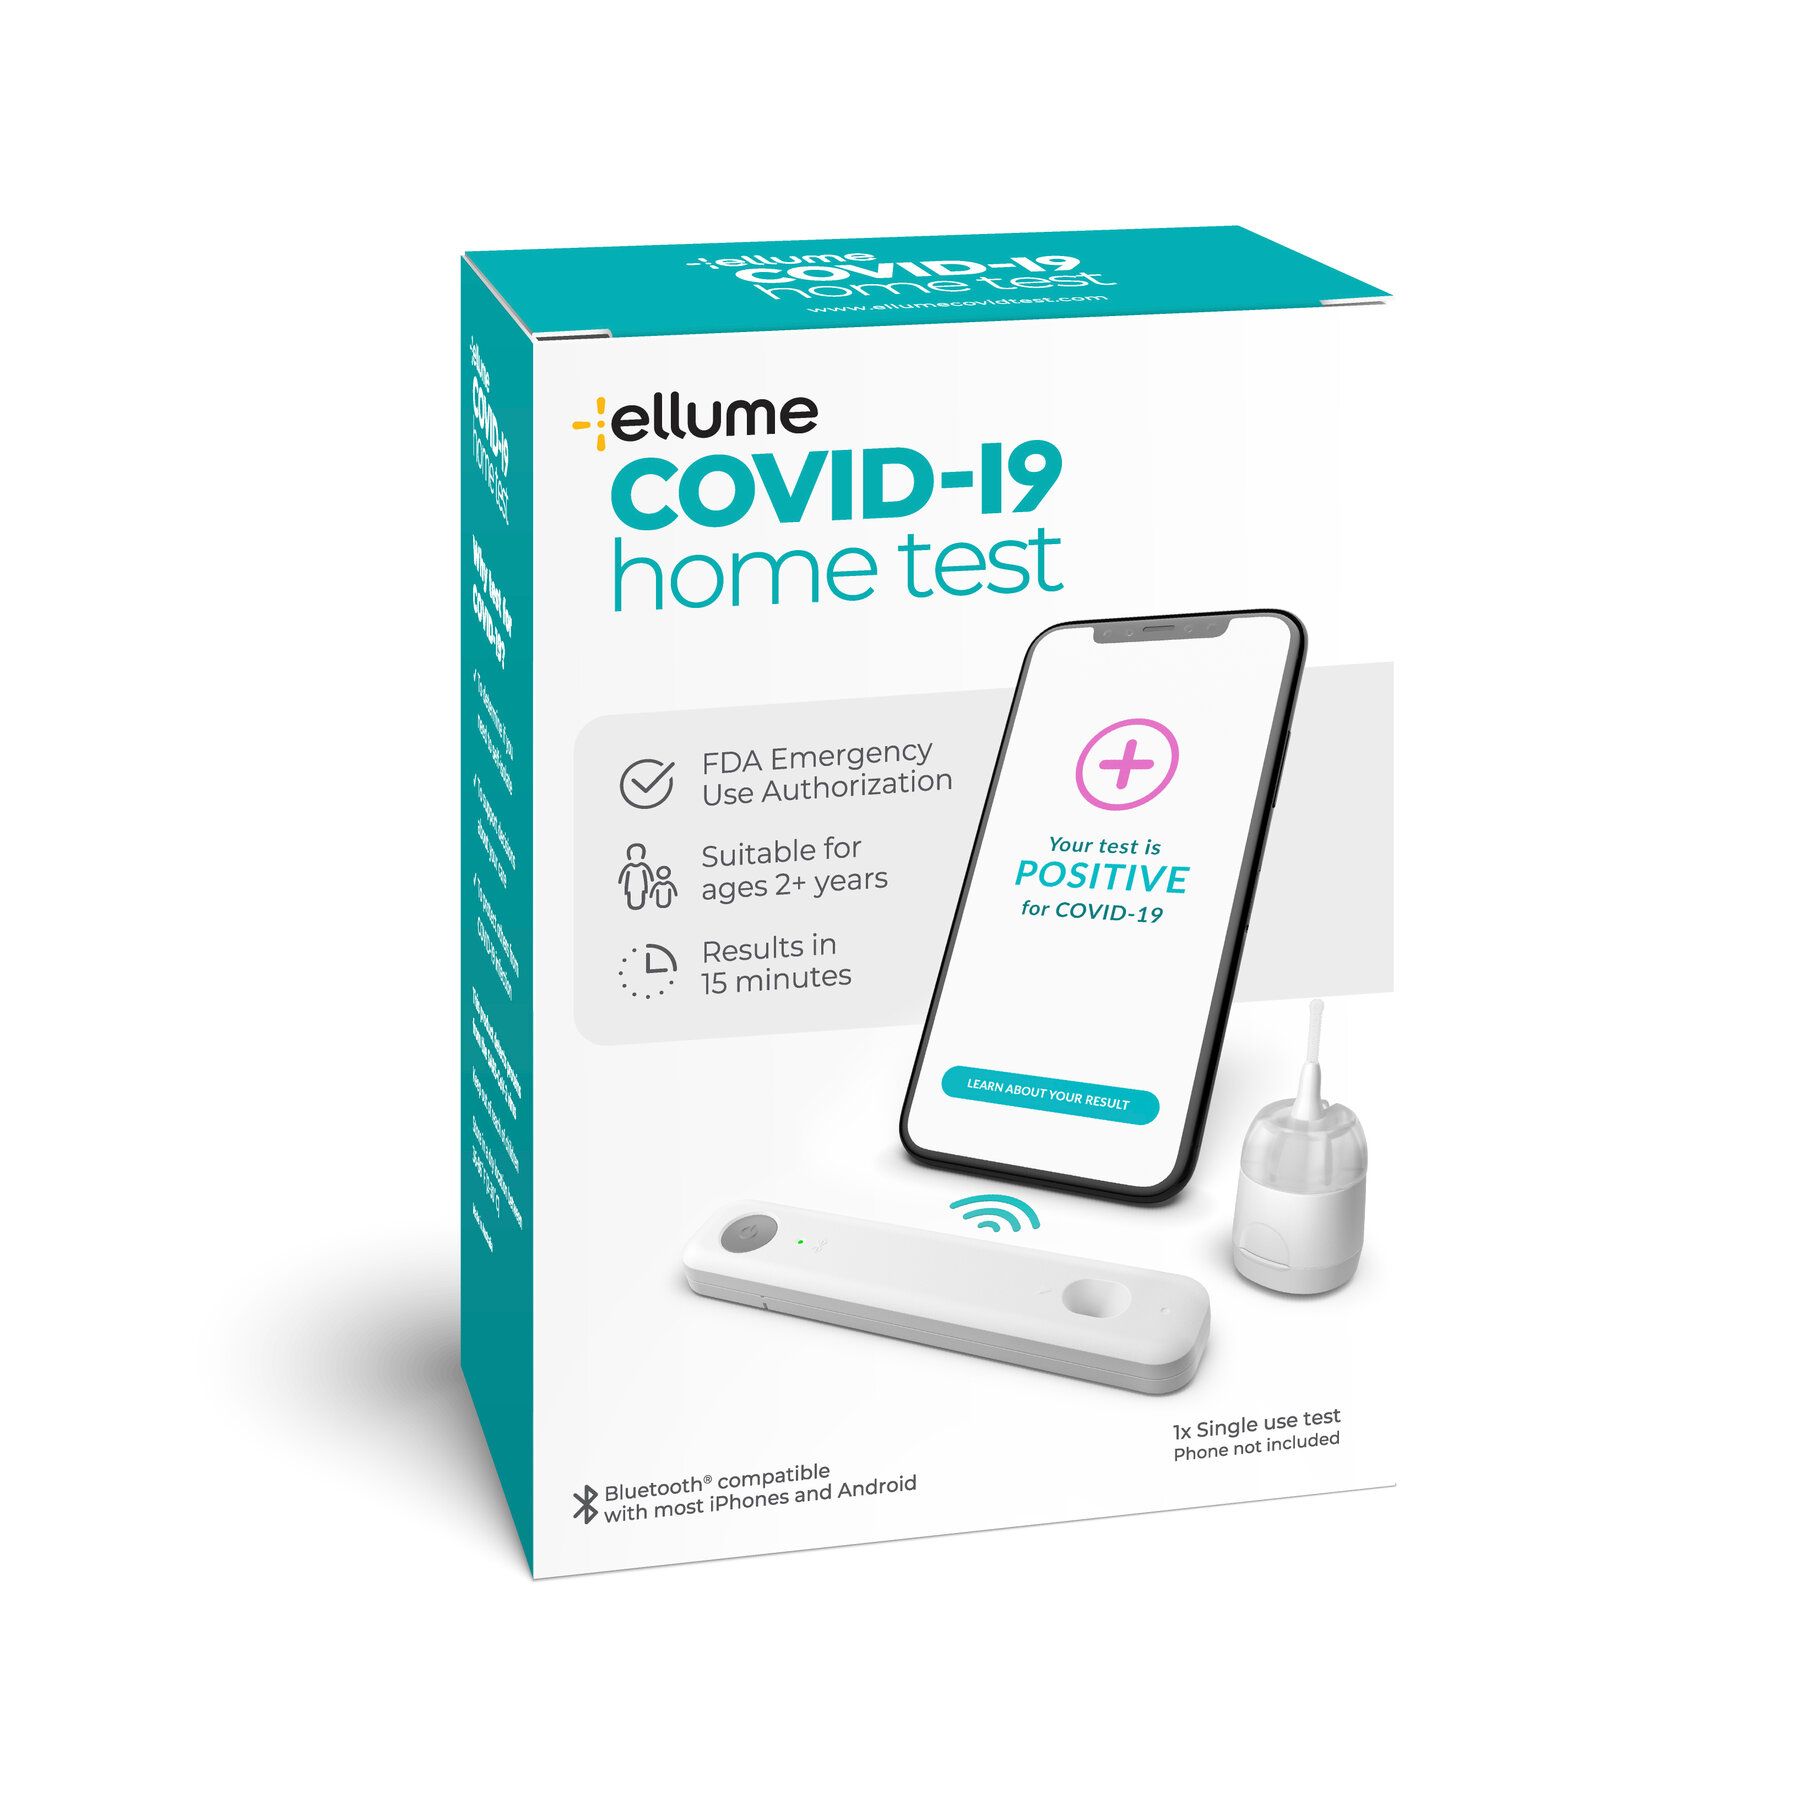 Home Covid-19 Tests Approved!